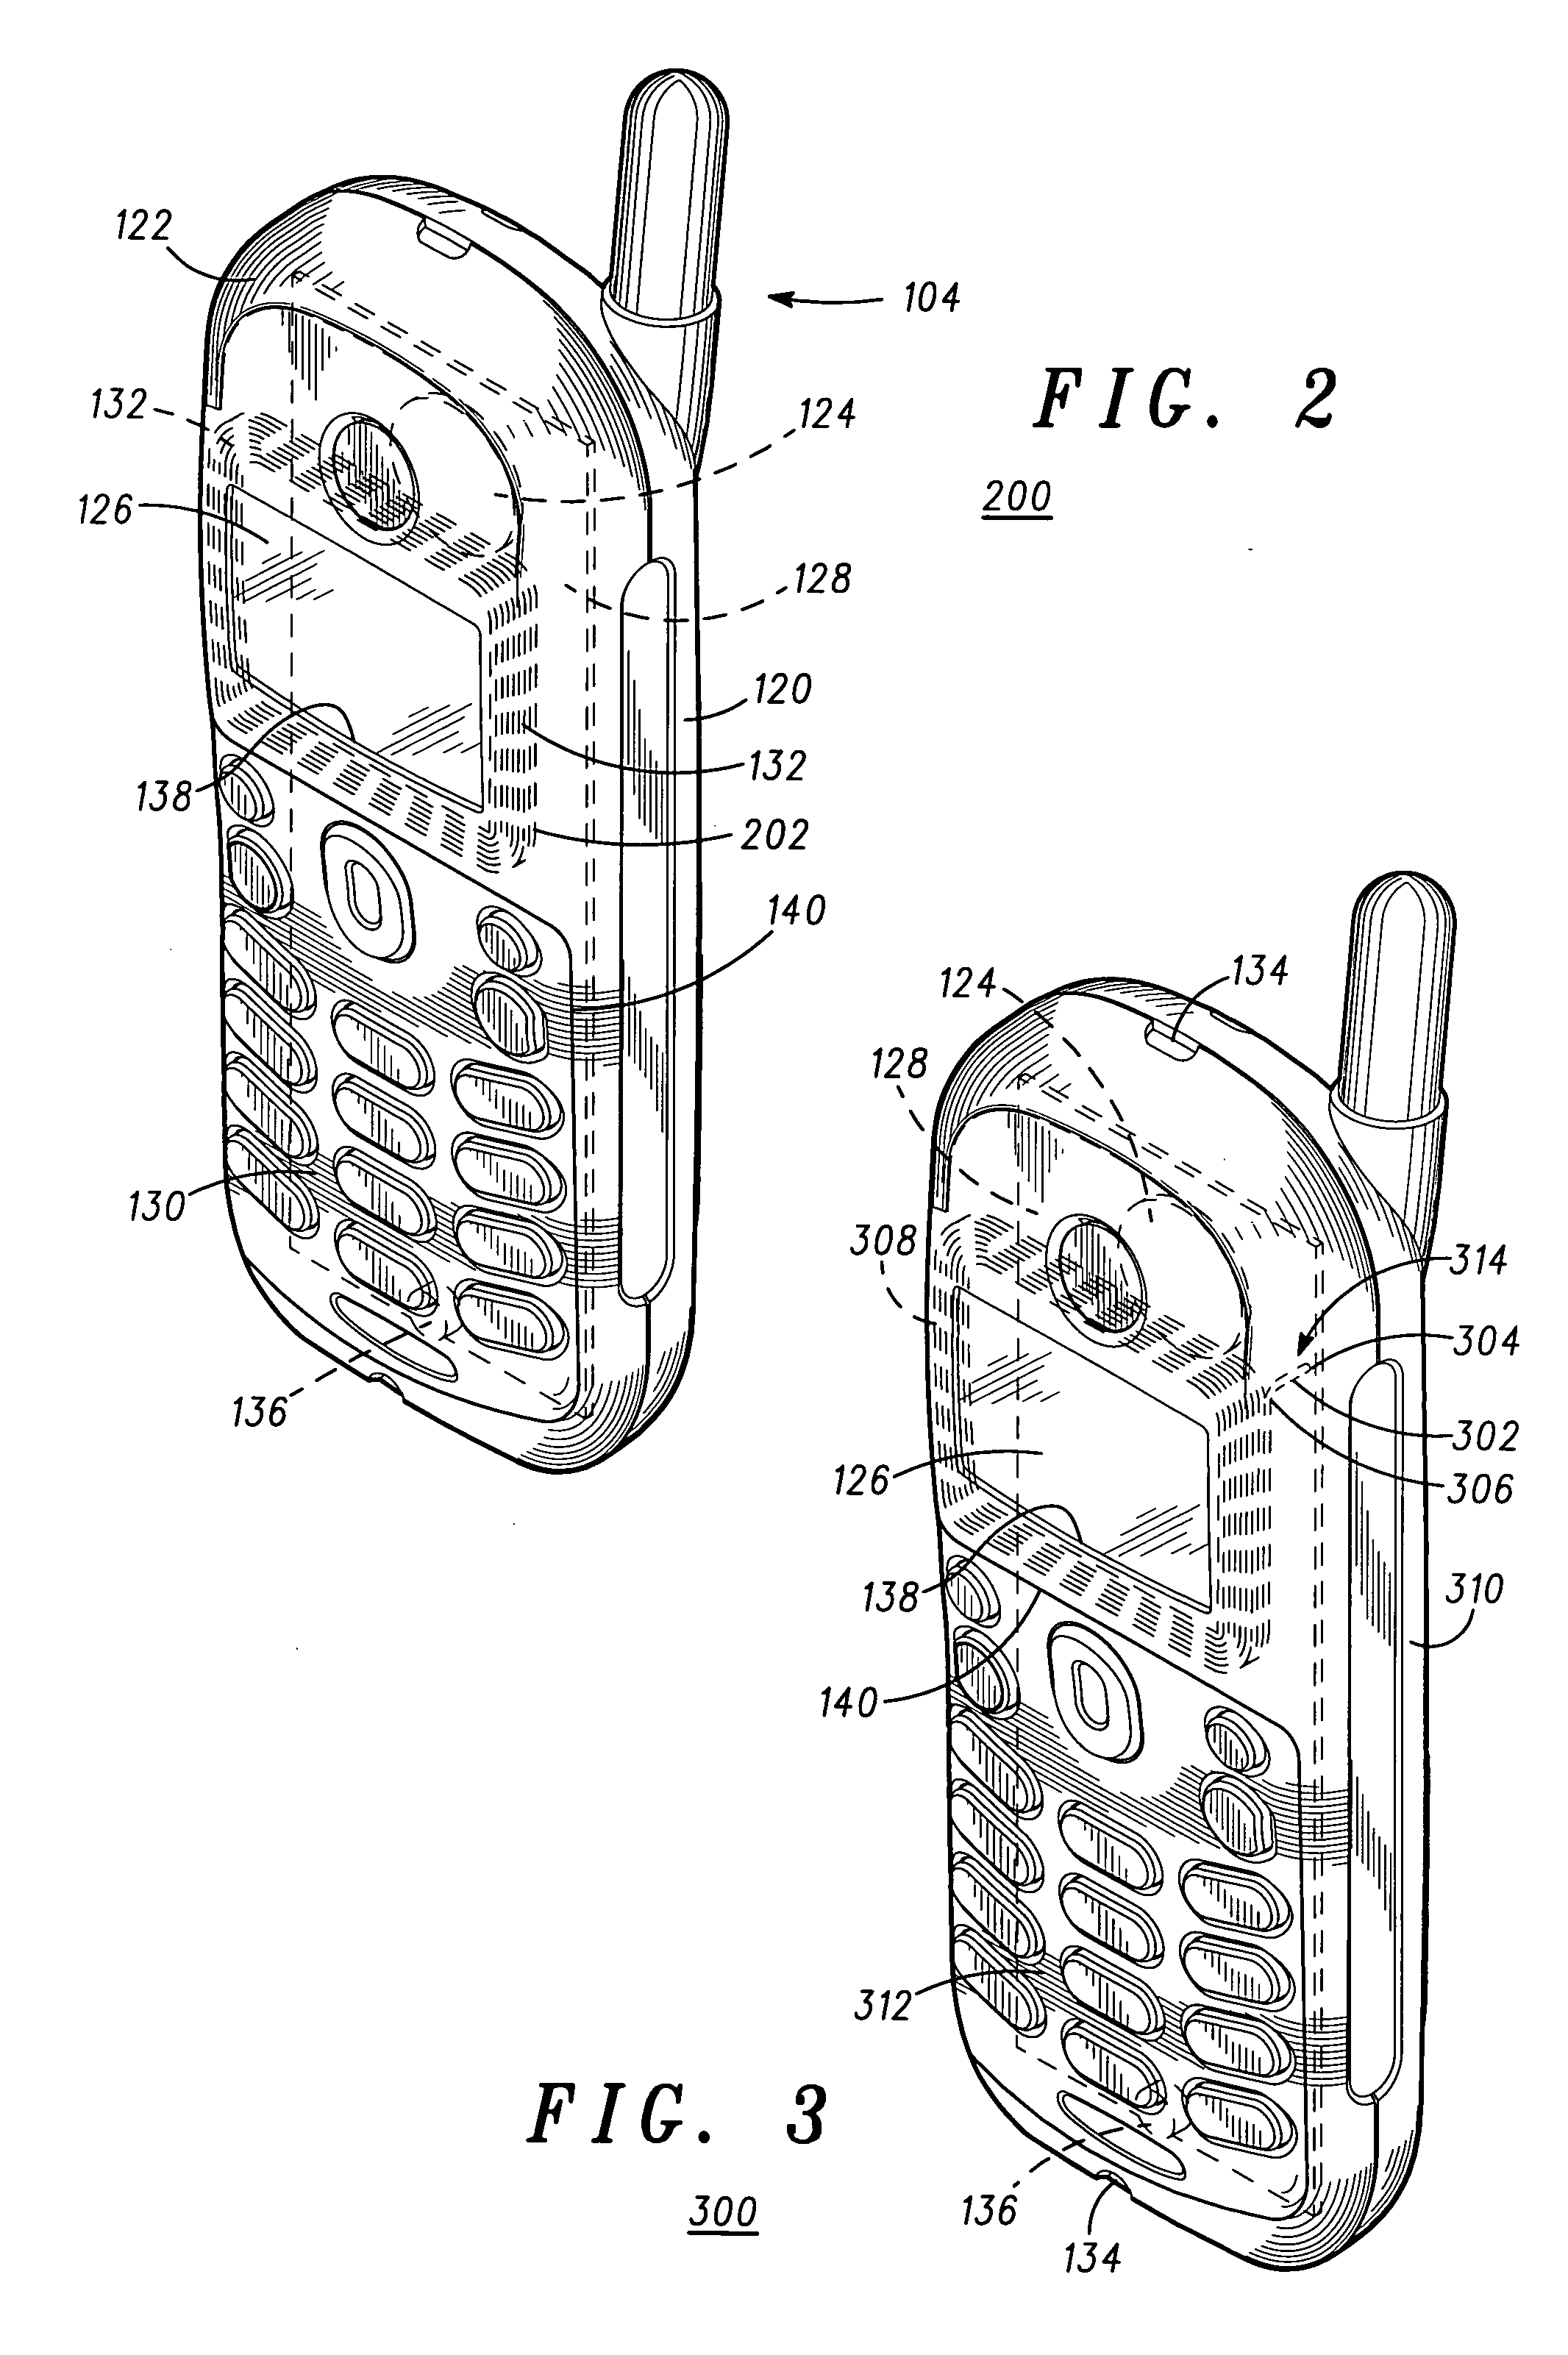 Hearing aid compatible device